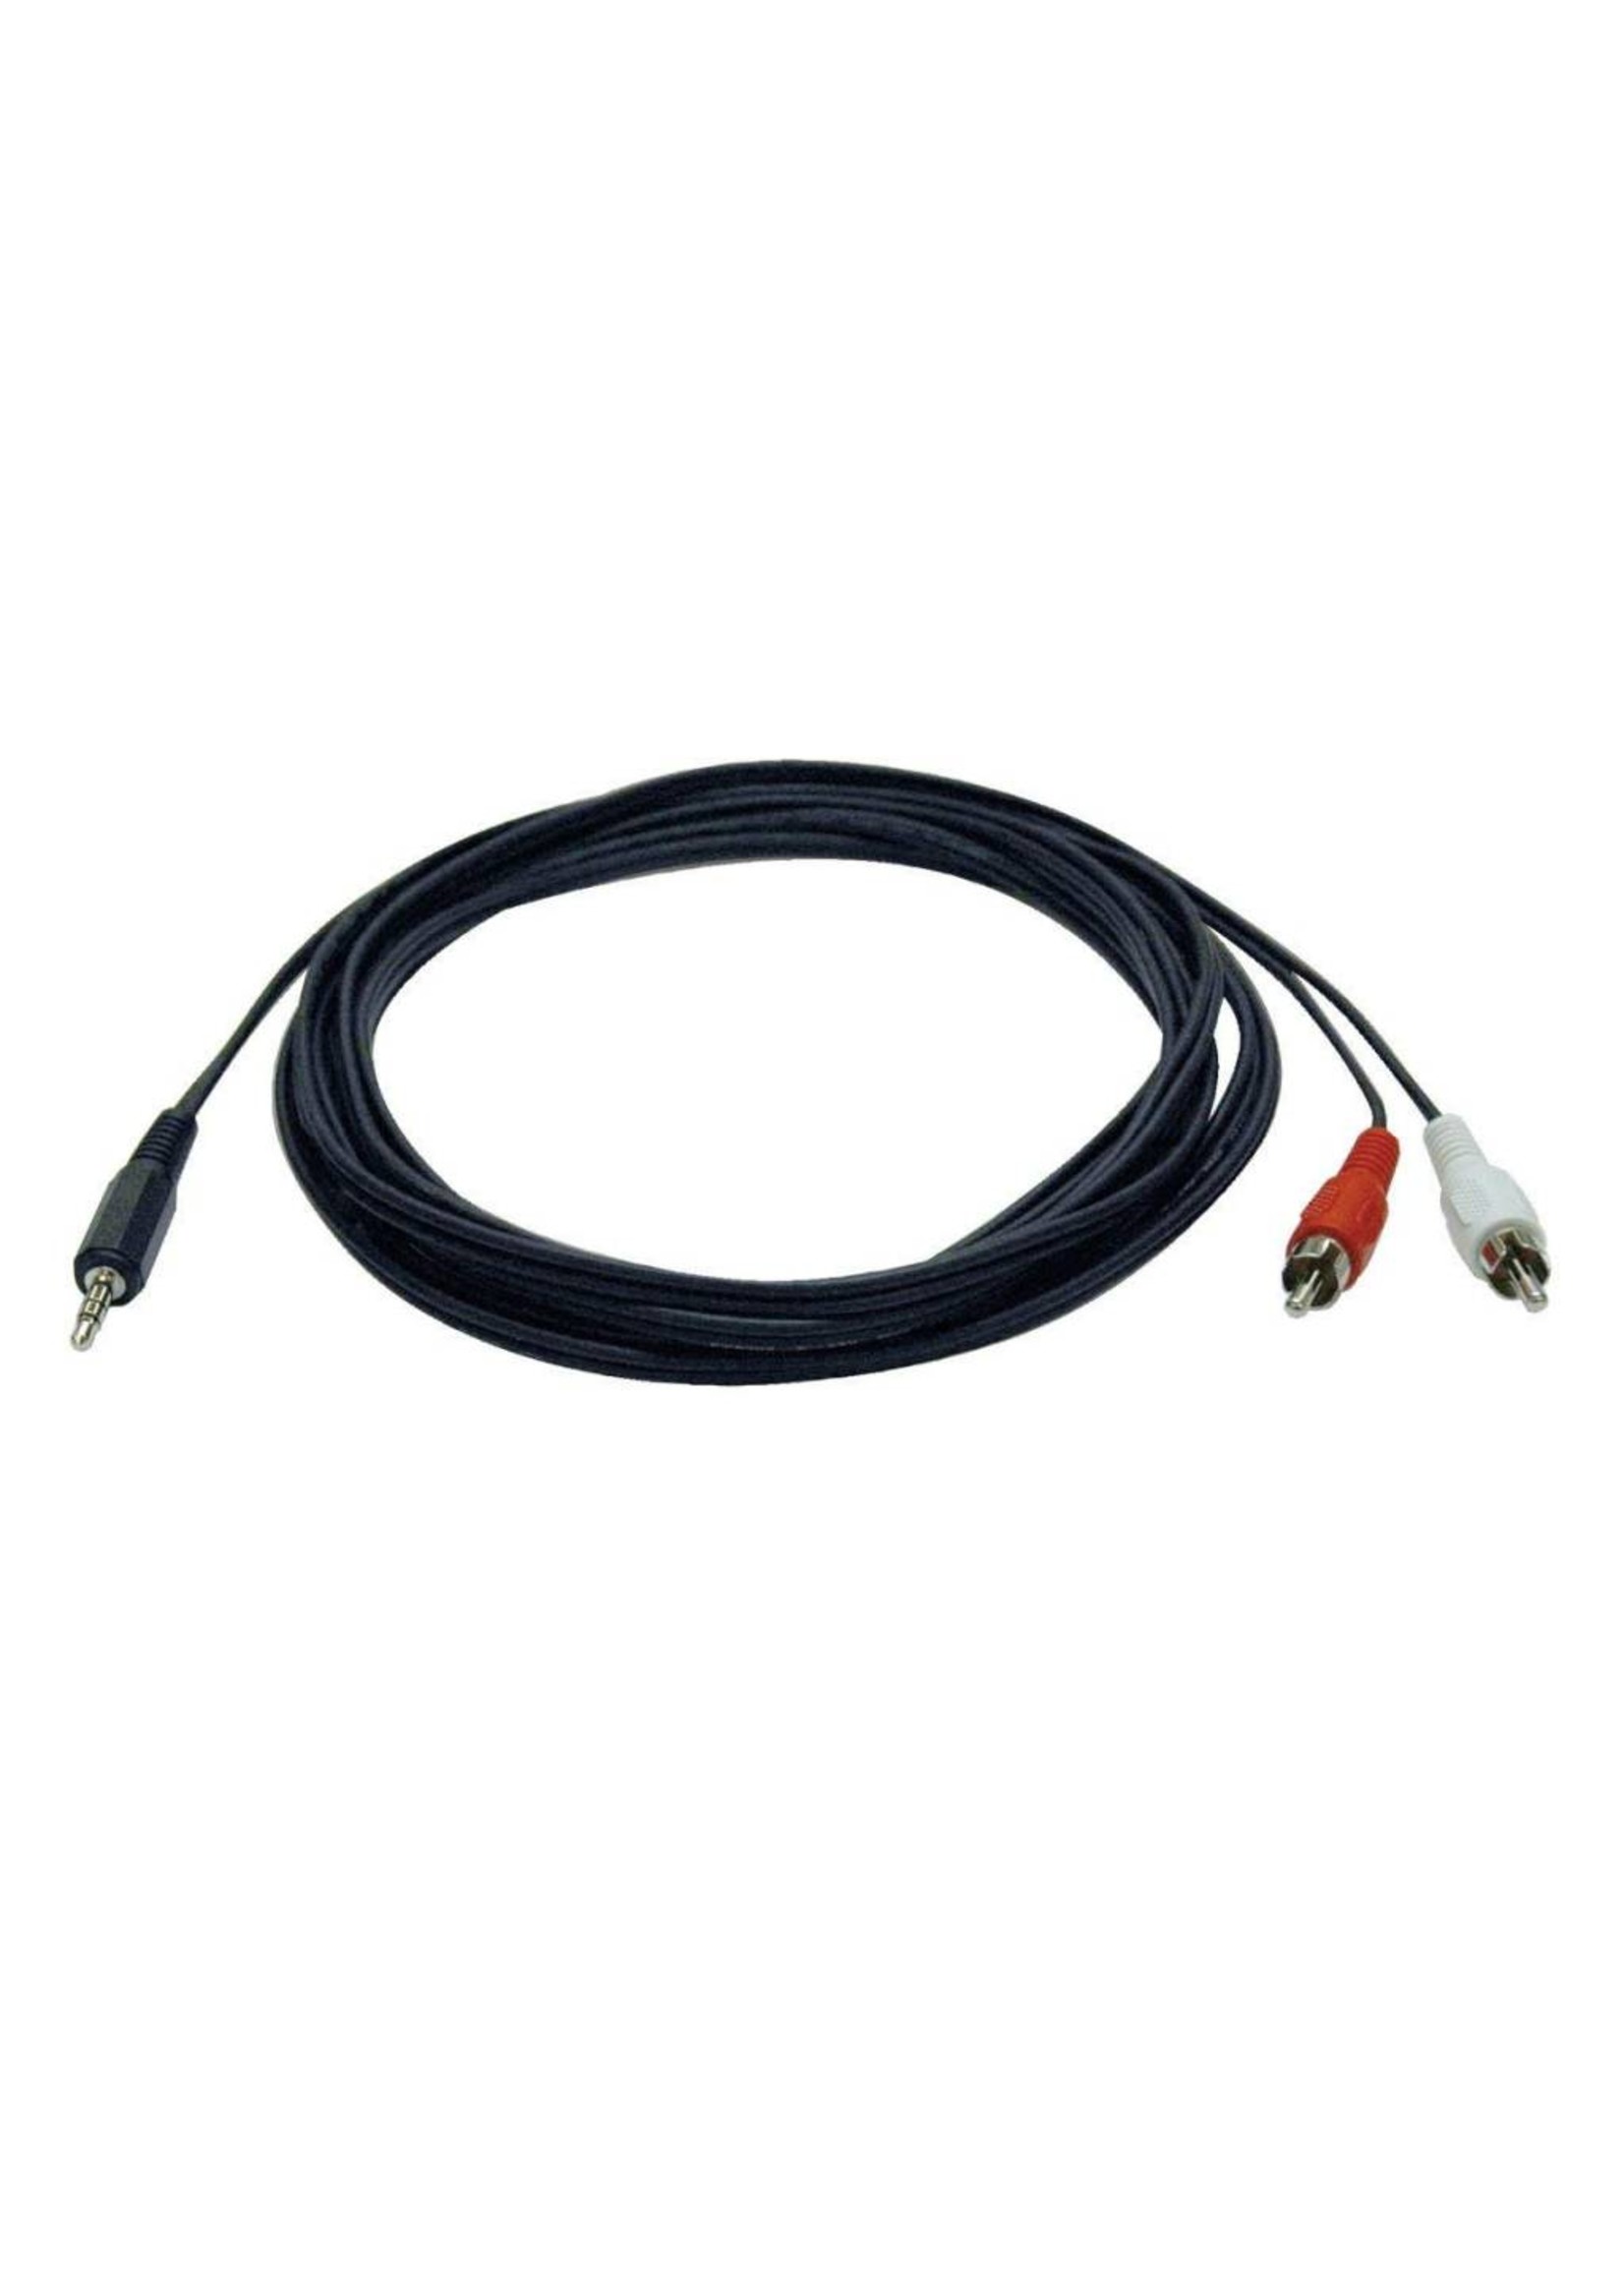 3.5mm to RCA Audio 12ft Cable